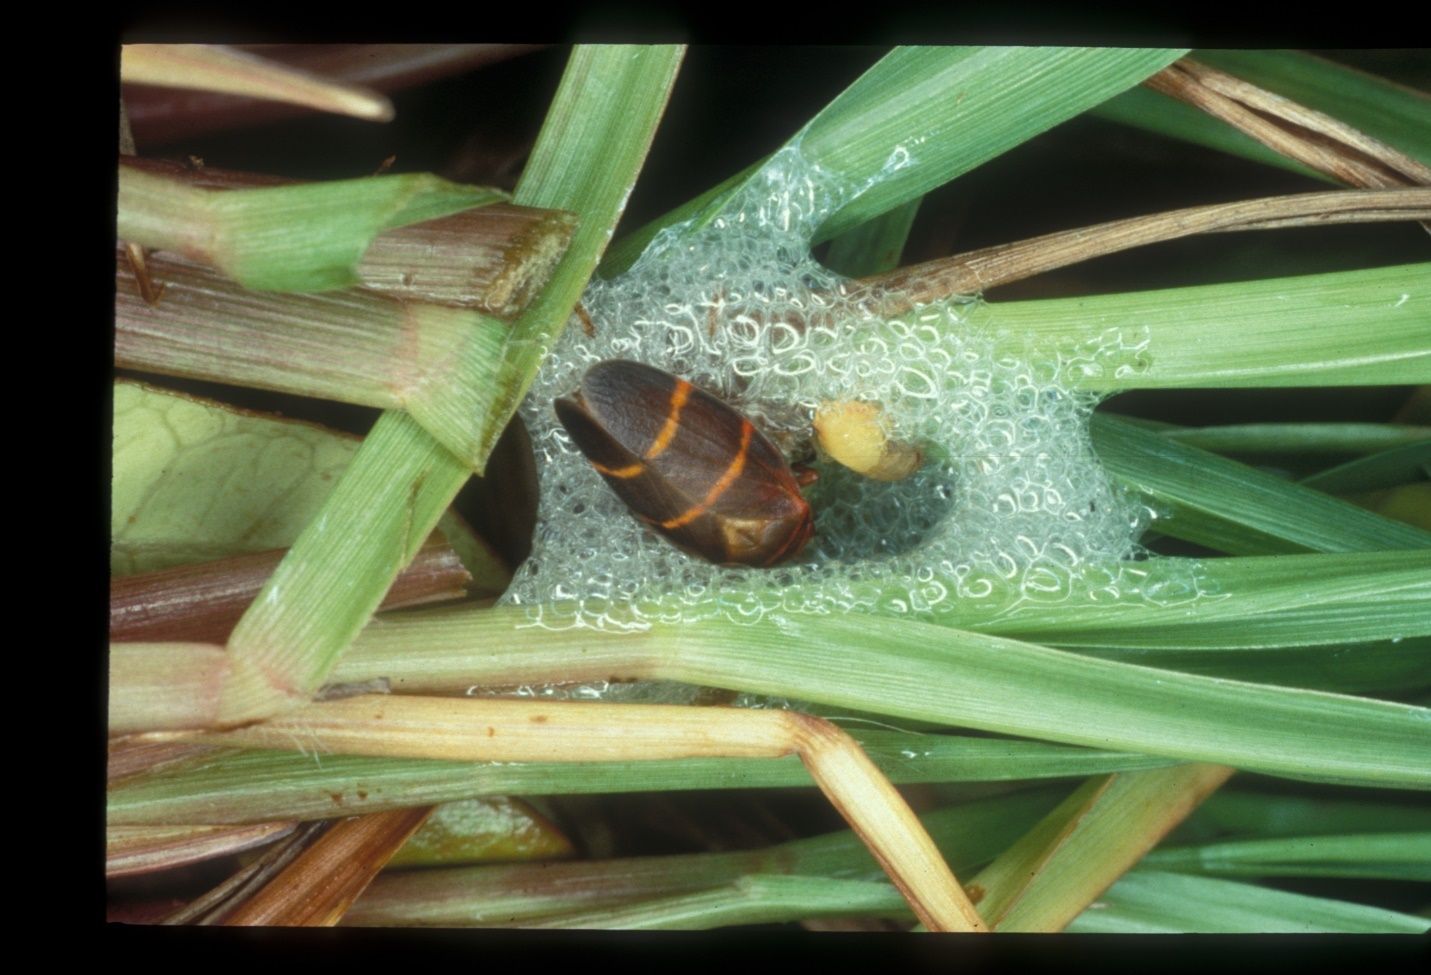 Newly emerged adult and young nymph of the two-lined spittlebug, Prosapia bicincta (Say), in a spittle mass on turfgrass. 